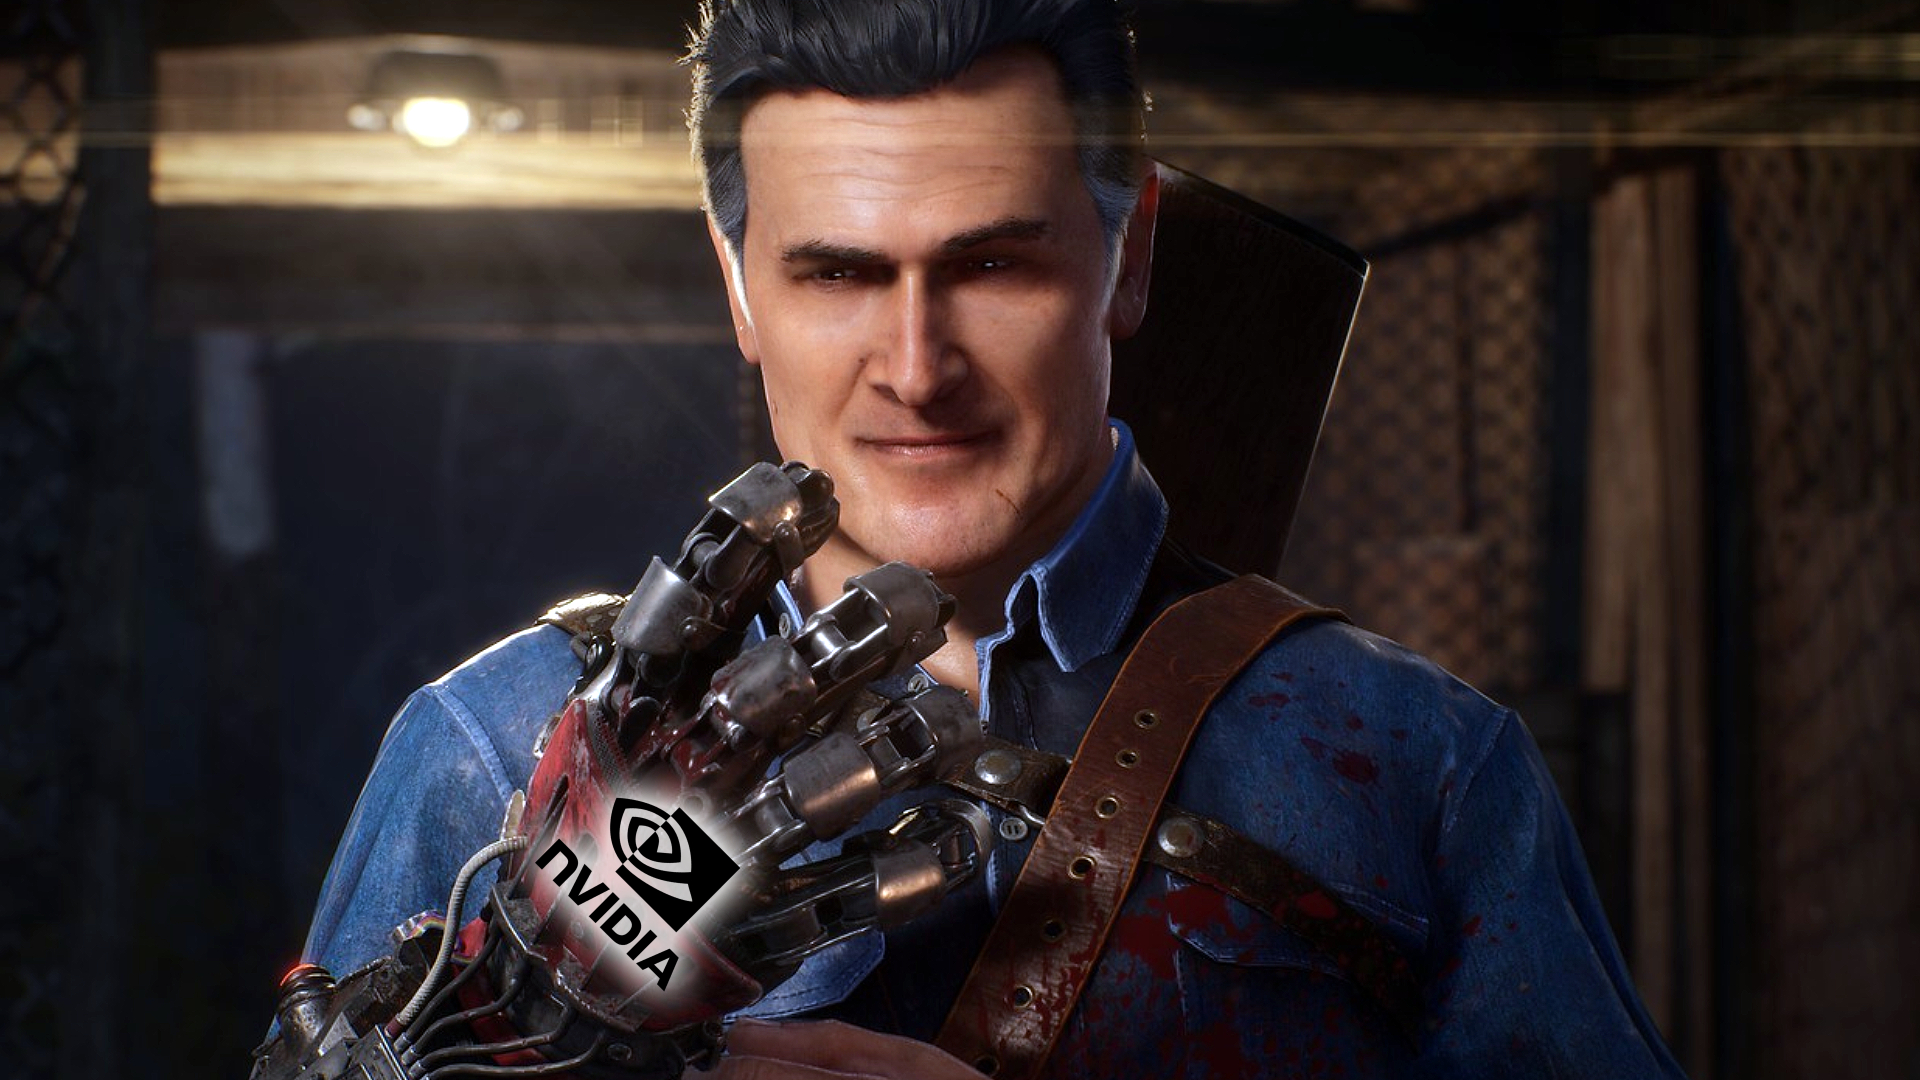 Evil Dead: The Game Available Now With NVIDIA DLSS, Boosting Frame Rates By  Up To 85%, GeForce News